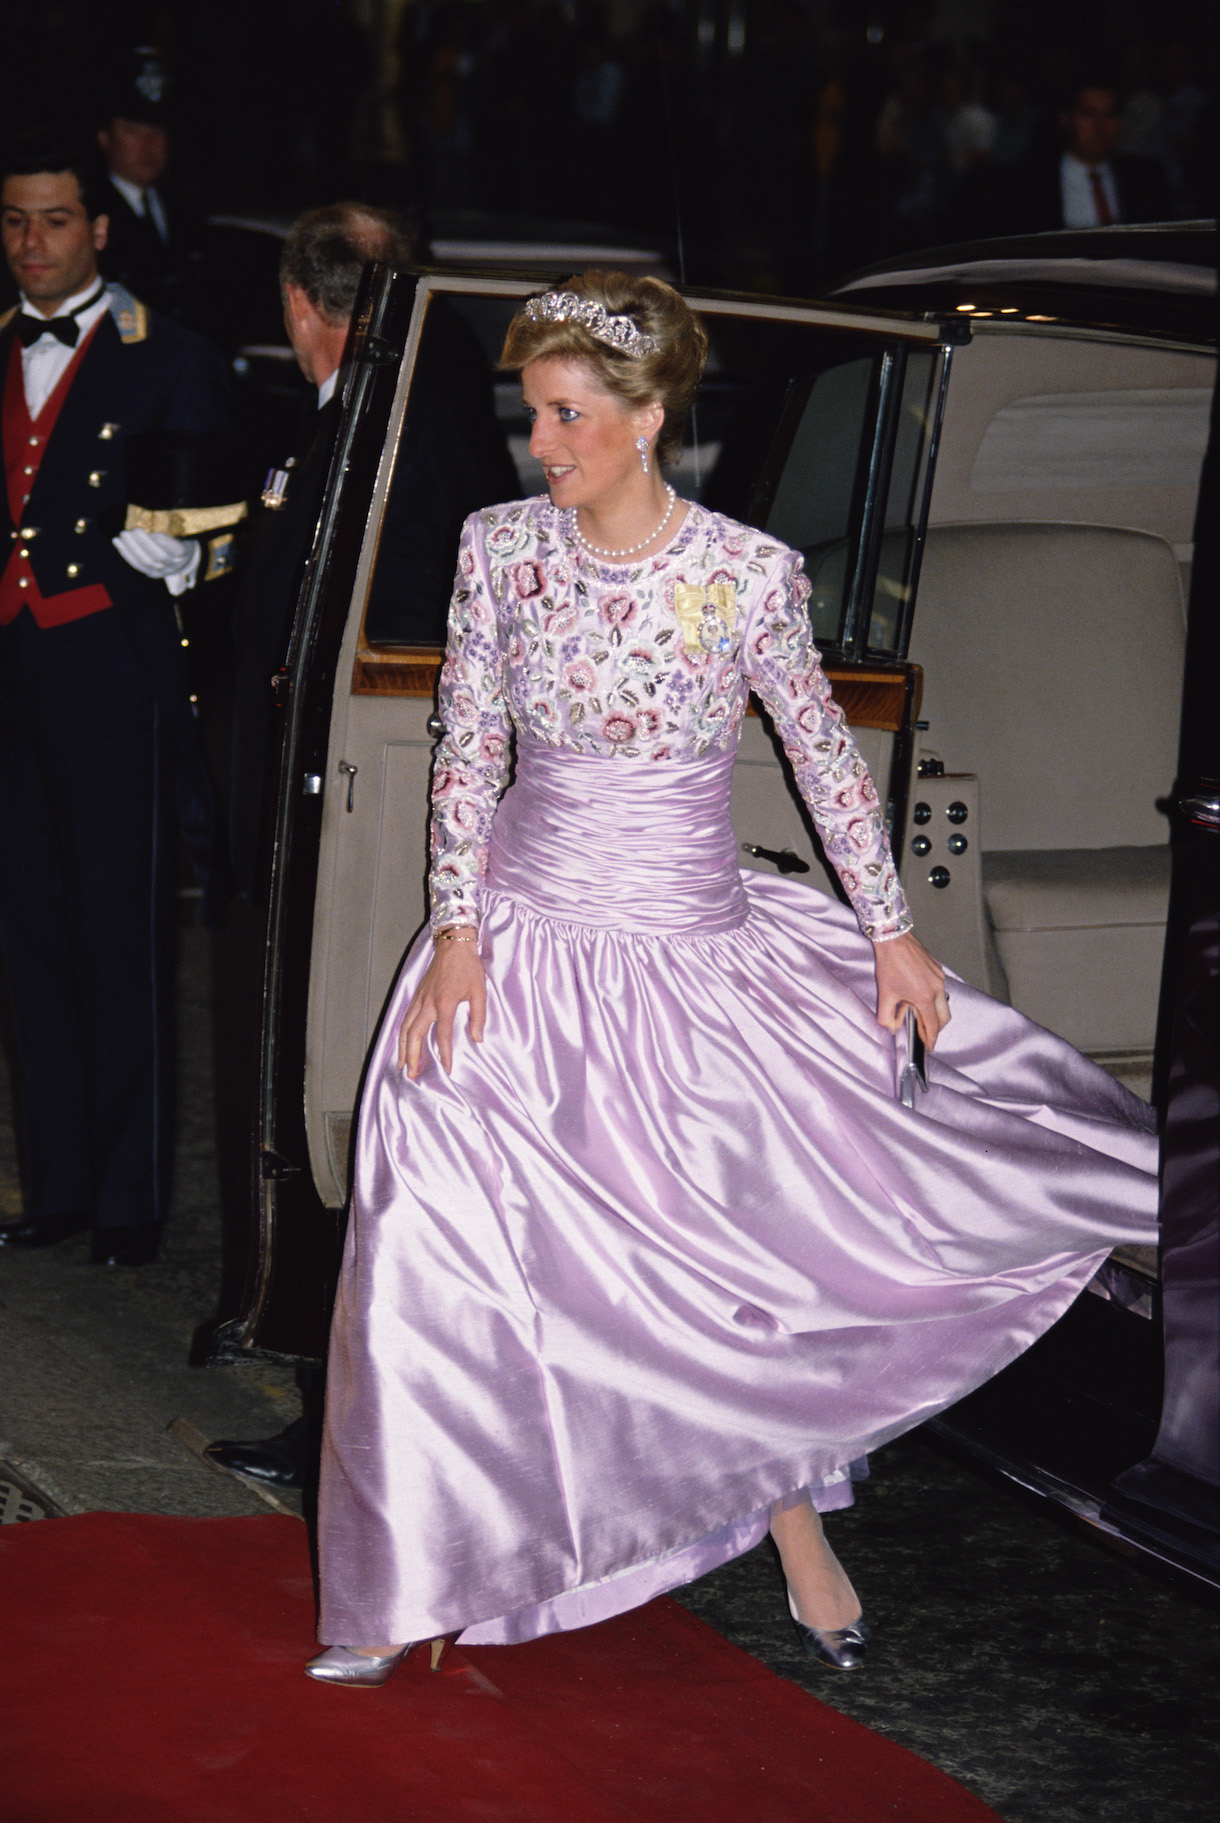 Prince Charles Was Furious With Princess Diana for Fainting in Public ...